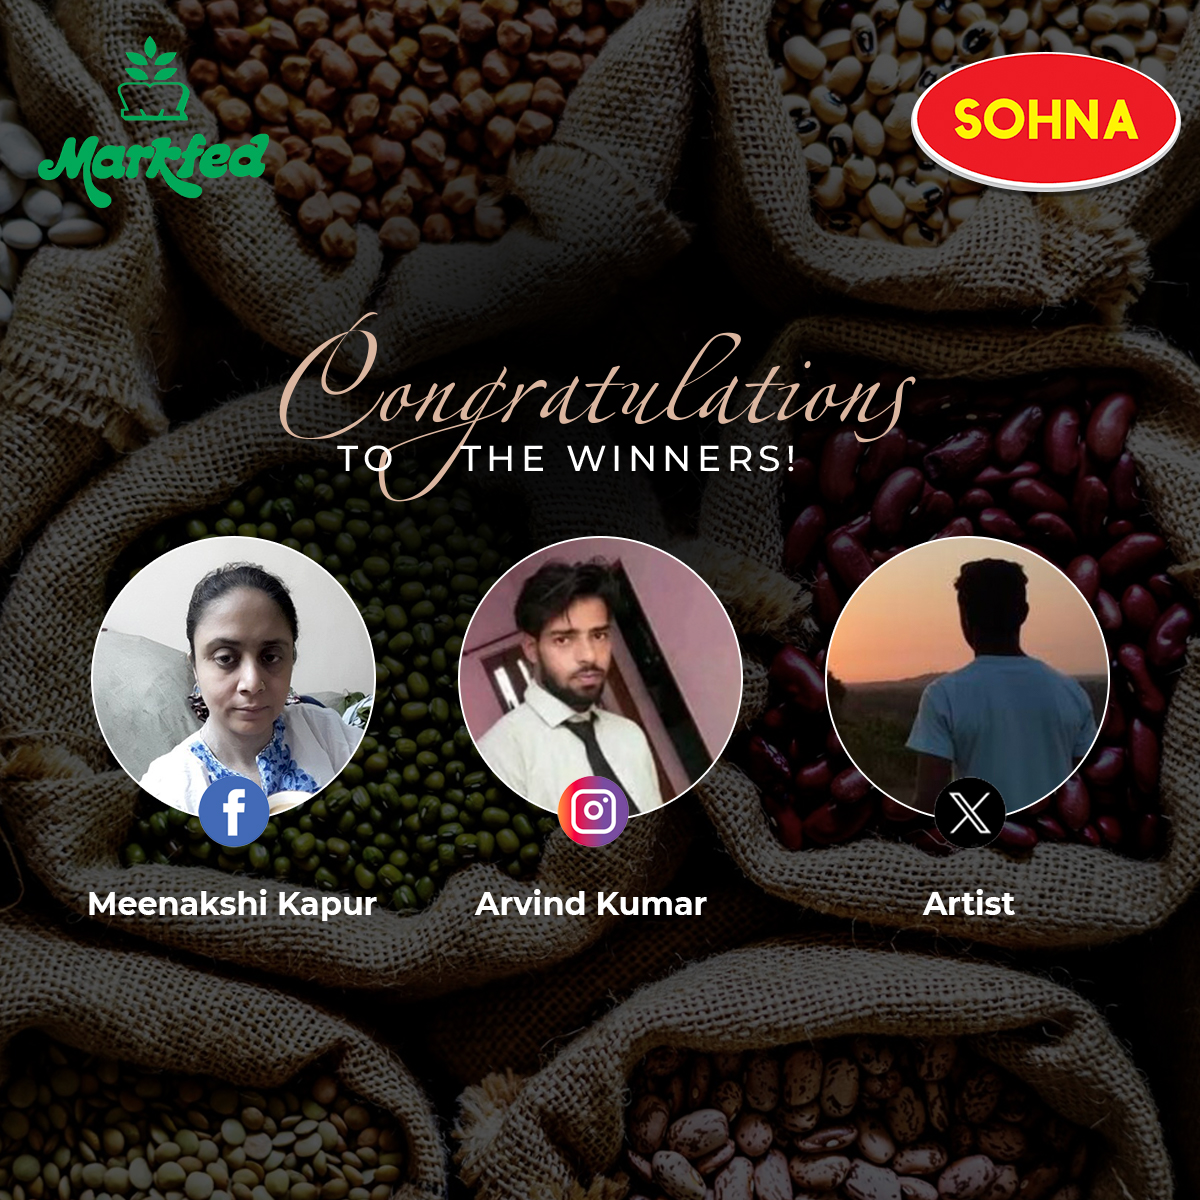 Congratulations to the triumphant trio of our Sohna contest. Please DM us your details within 3 days to claim the hamper. 🌟🎁 #SOHNA #SOHNAMarkfed #Punjab #ContestWinner #Announcement #ExcitingNews #LuckyWinner #Congratulations #ContestResults